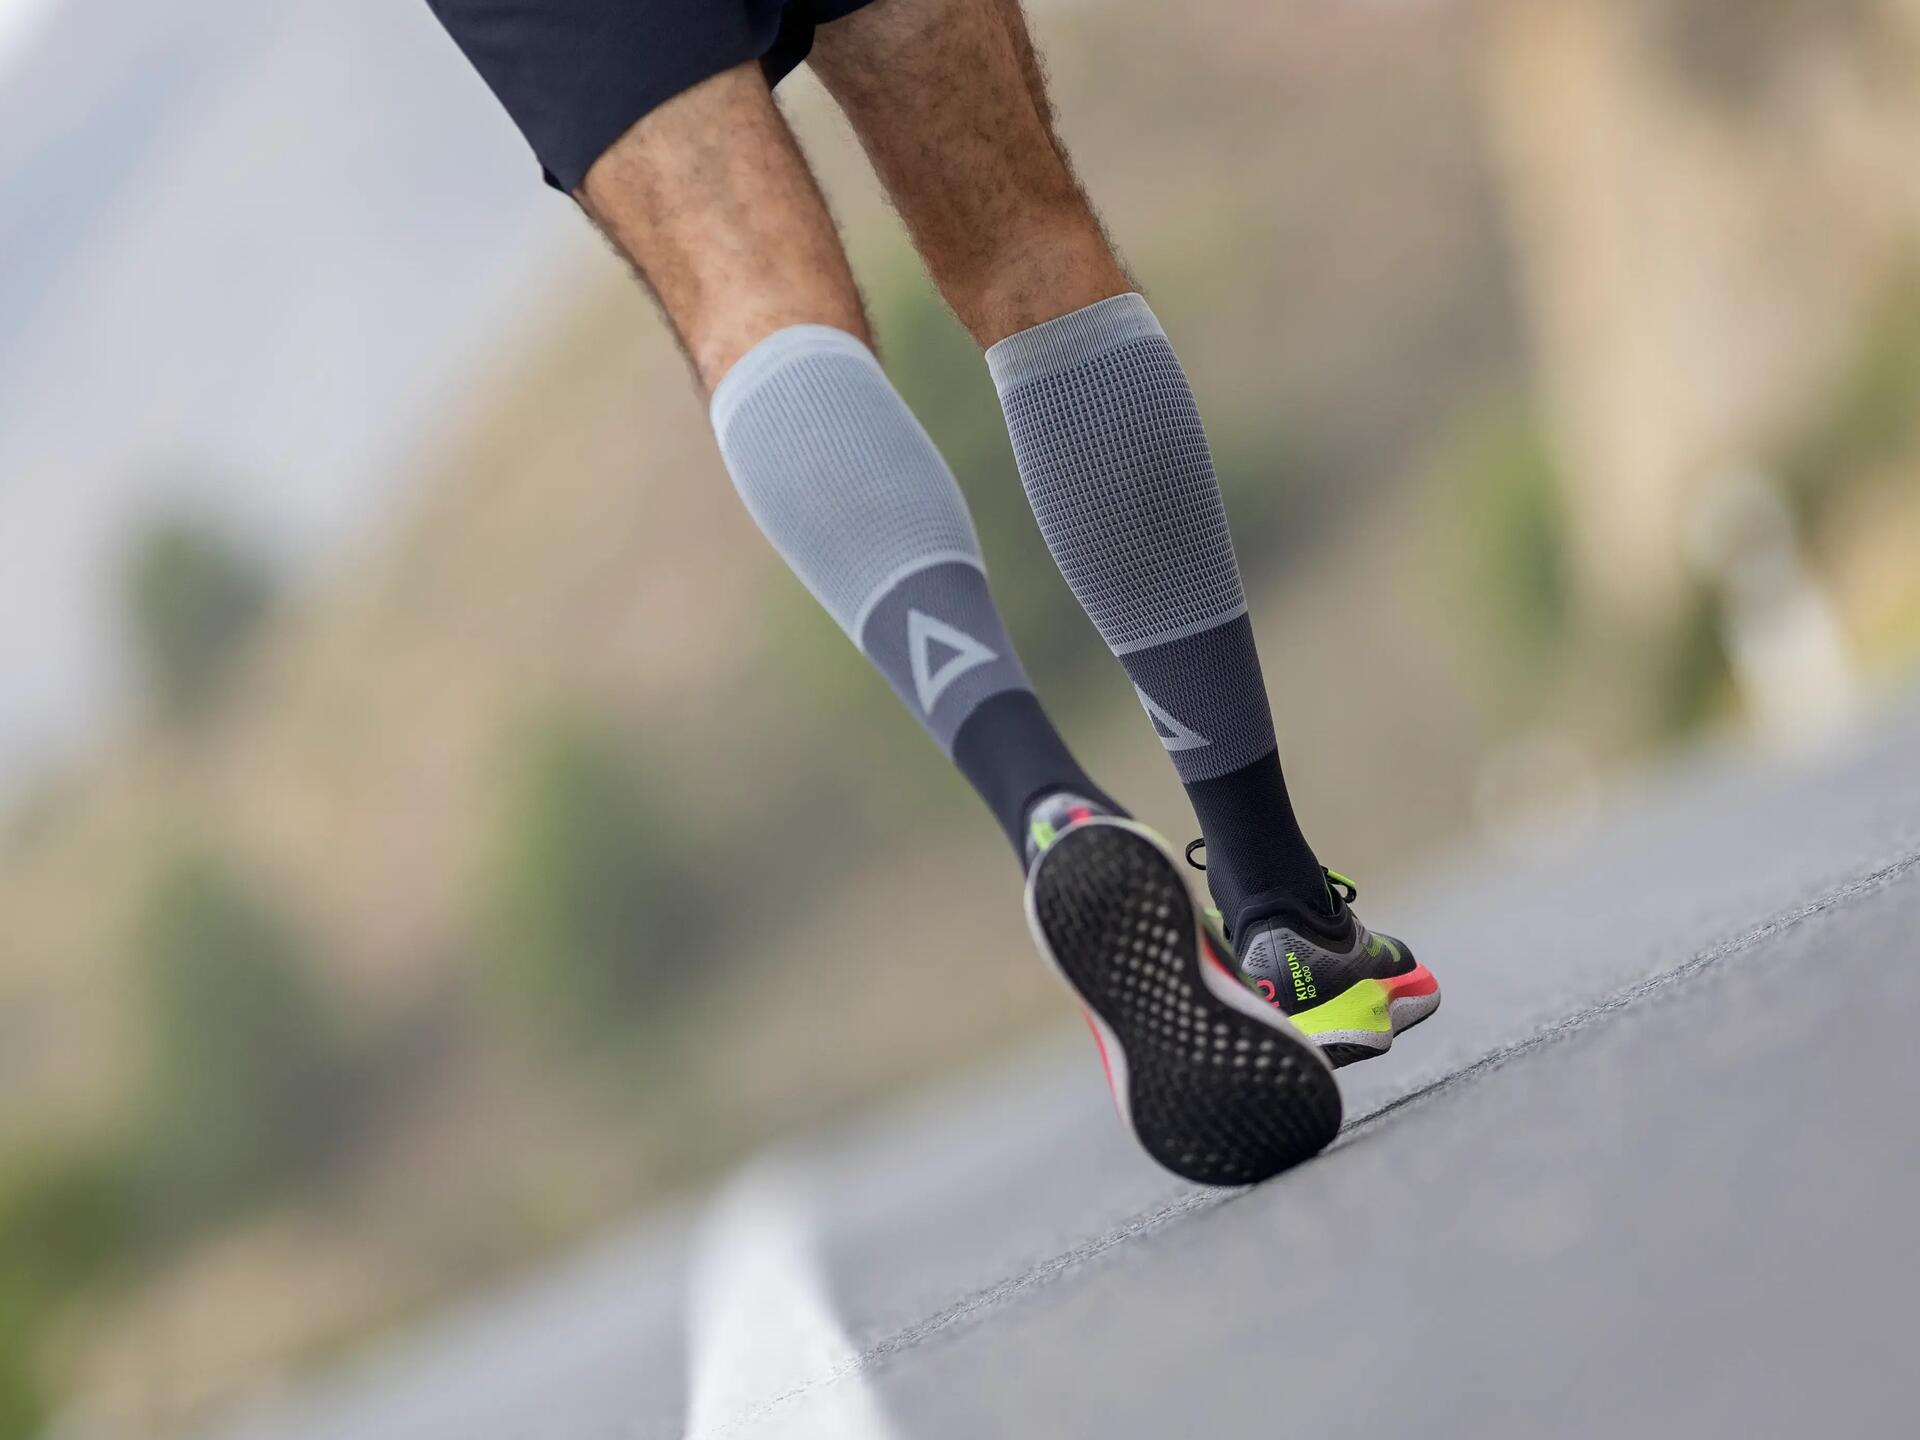 How To Choose Your Running Socks?